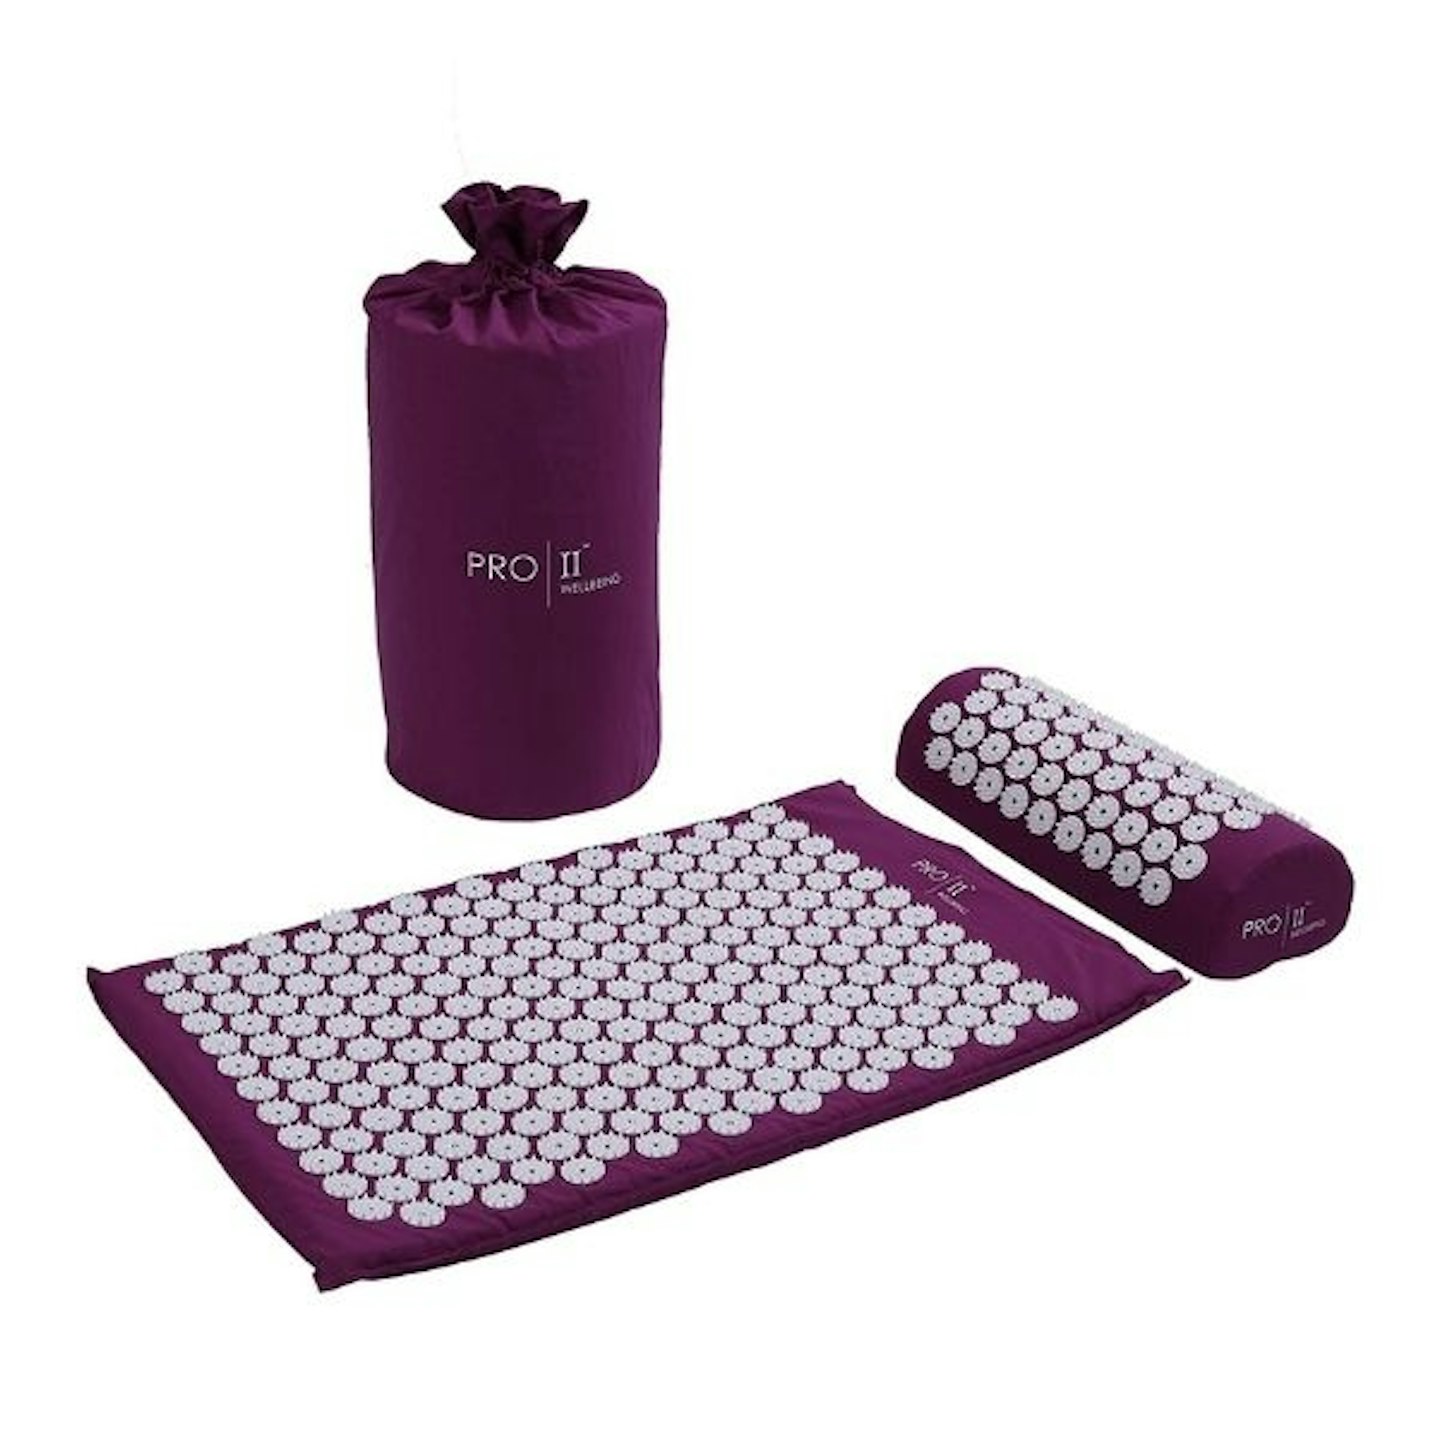 Acupressure Mat Benefits: How This Recovery Tool Relieves Tension